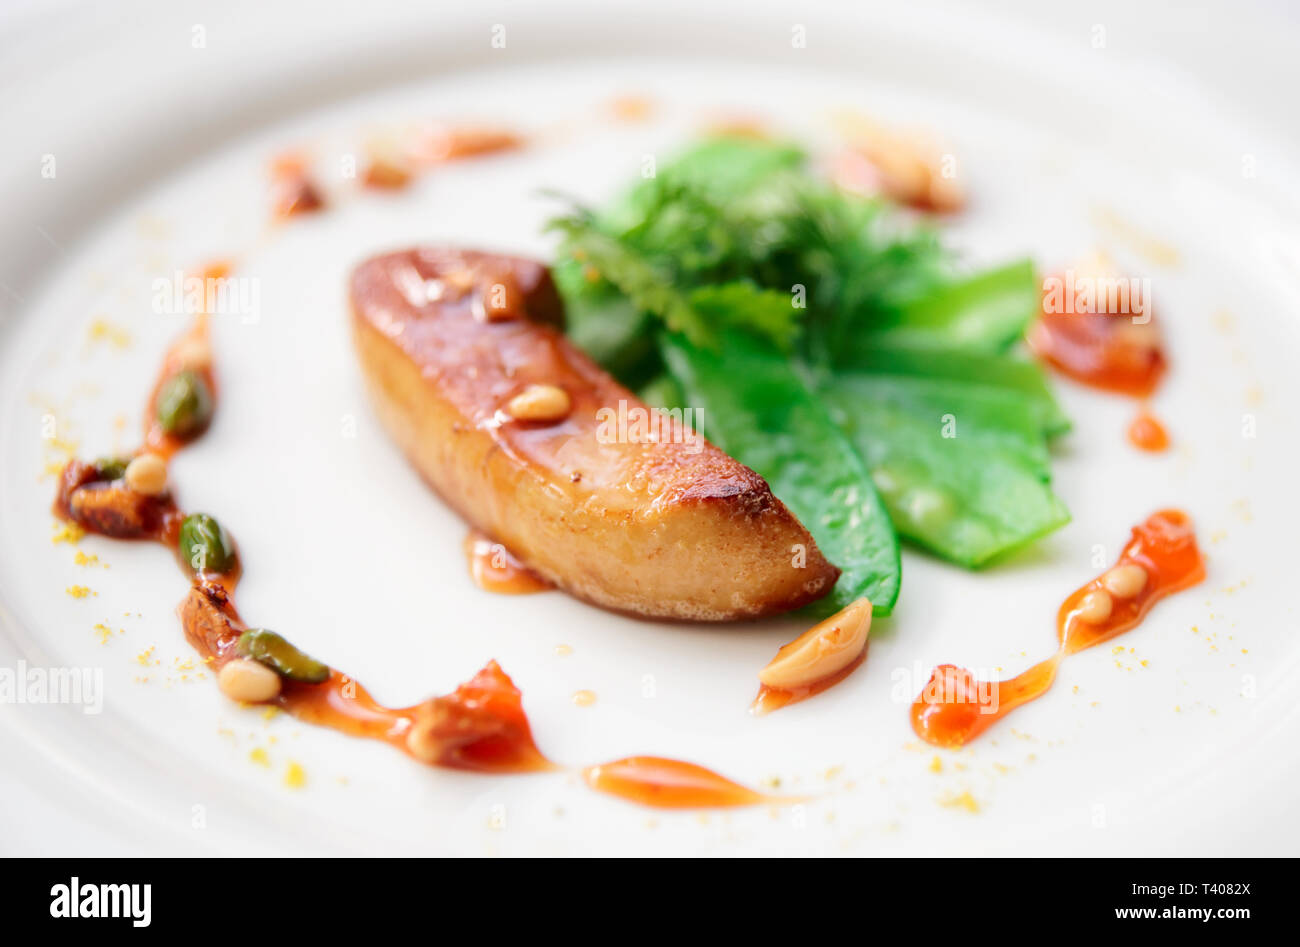 Fried foie gras with caramelized nuts and vegetables, shallow focus depth Stock Photo